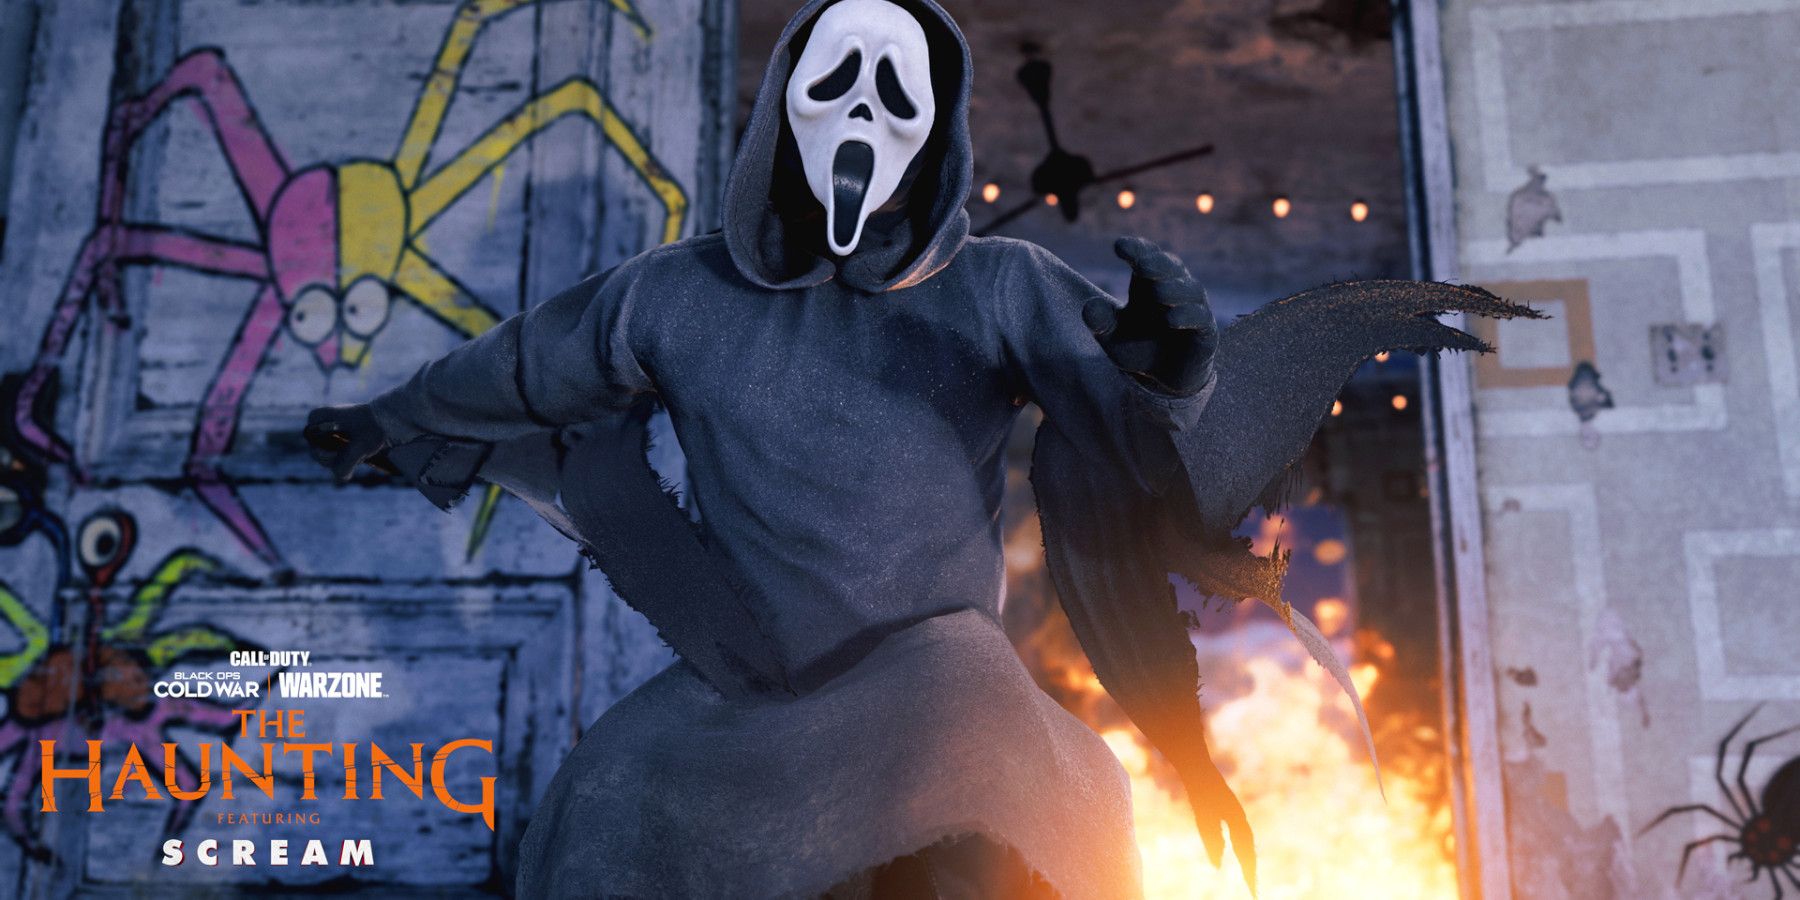 warzone-ghostface-call-of-duty-promo-image